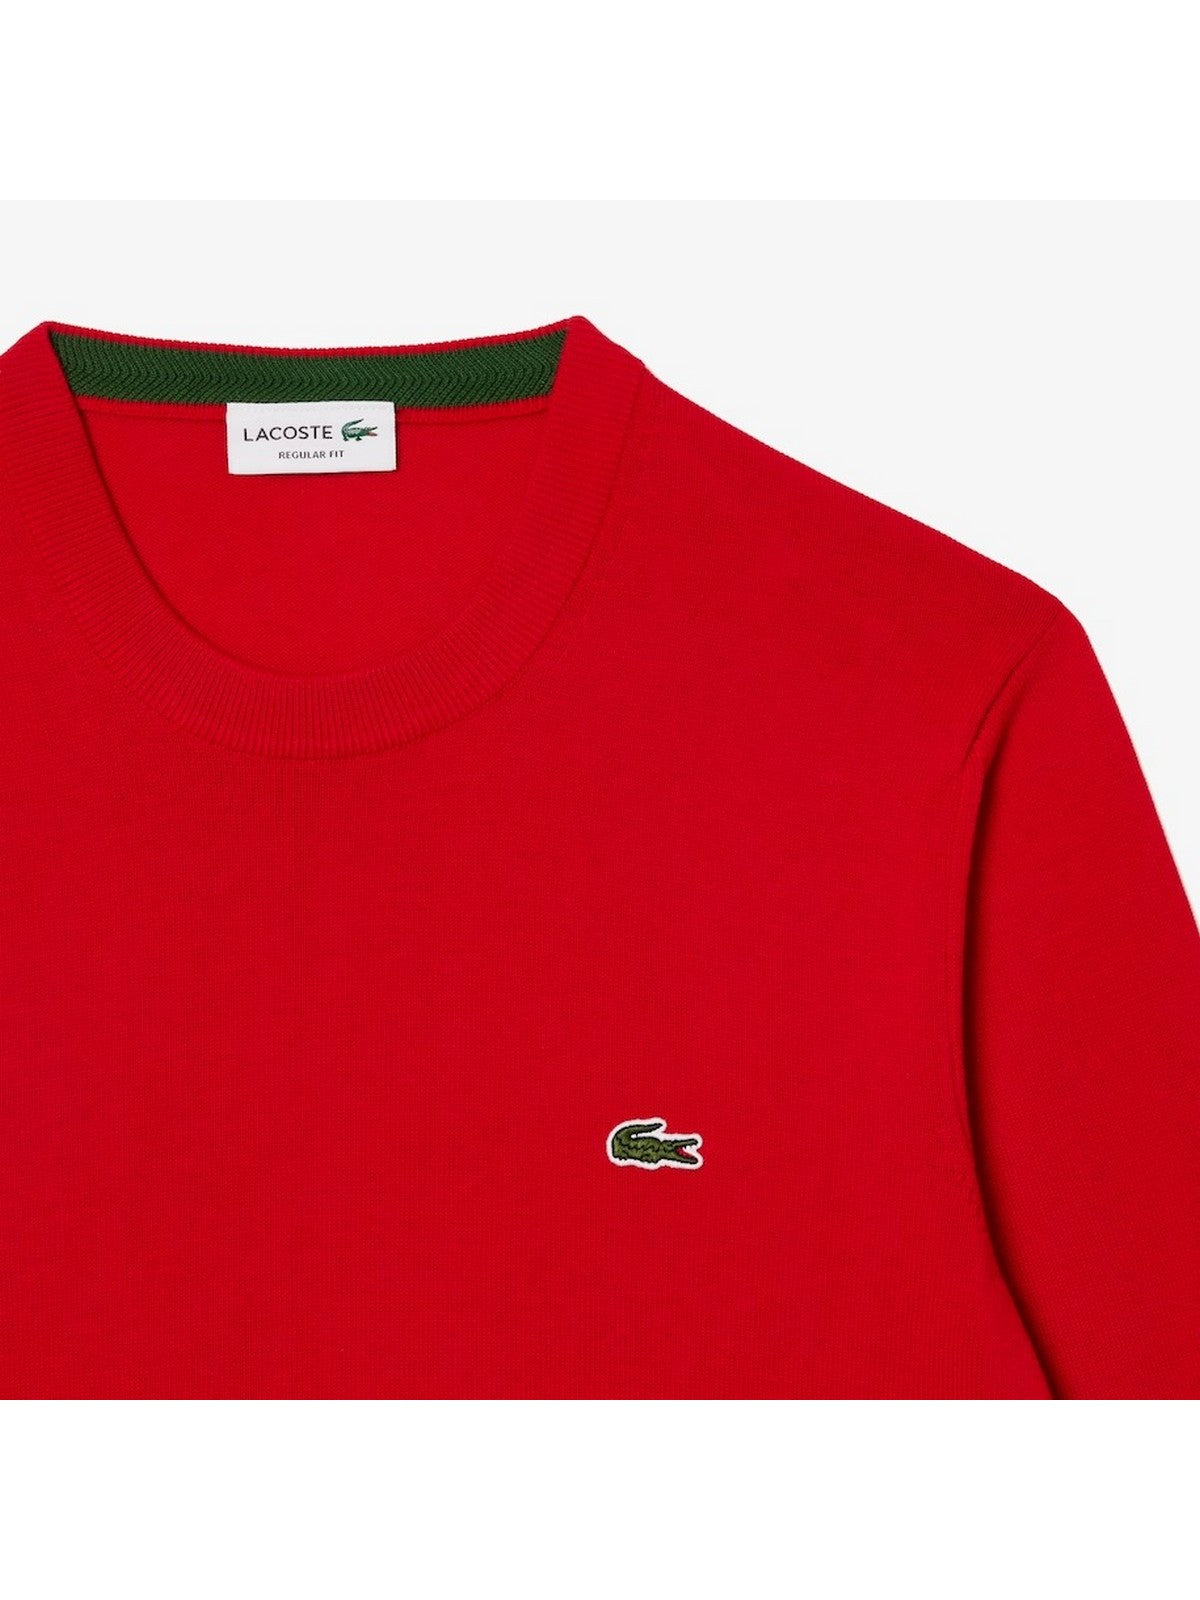 LACOSTE Hommes Pull AH1985 240 Rouge